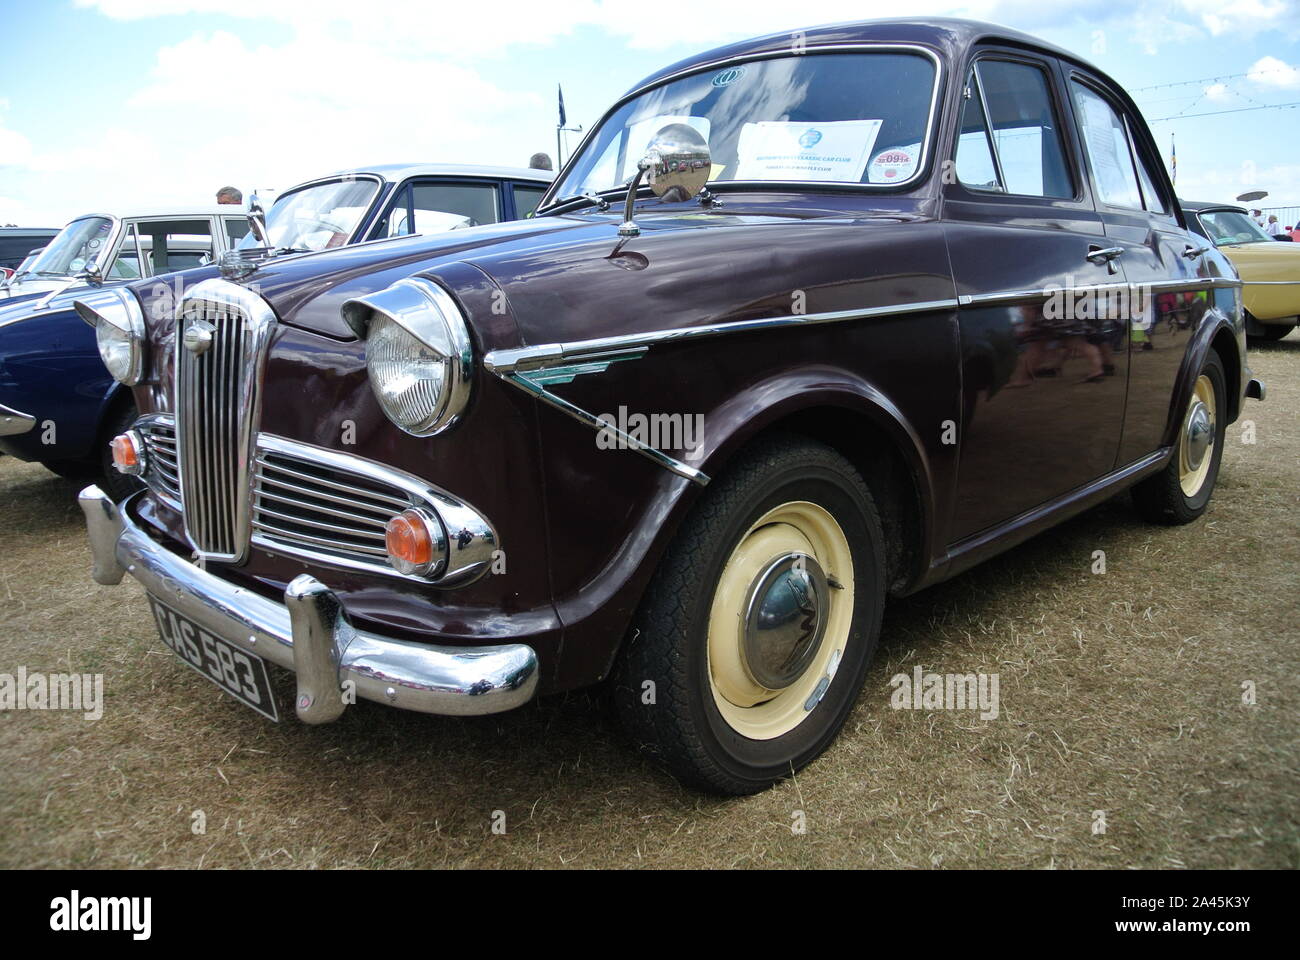 A 1960 Rover P4 Parked Up On Display At The English Riviera Classic Car Show Paignton Devon